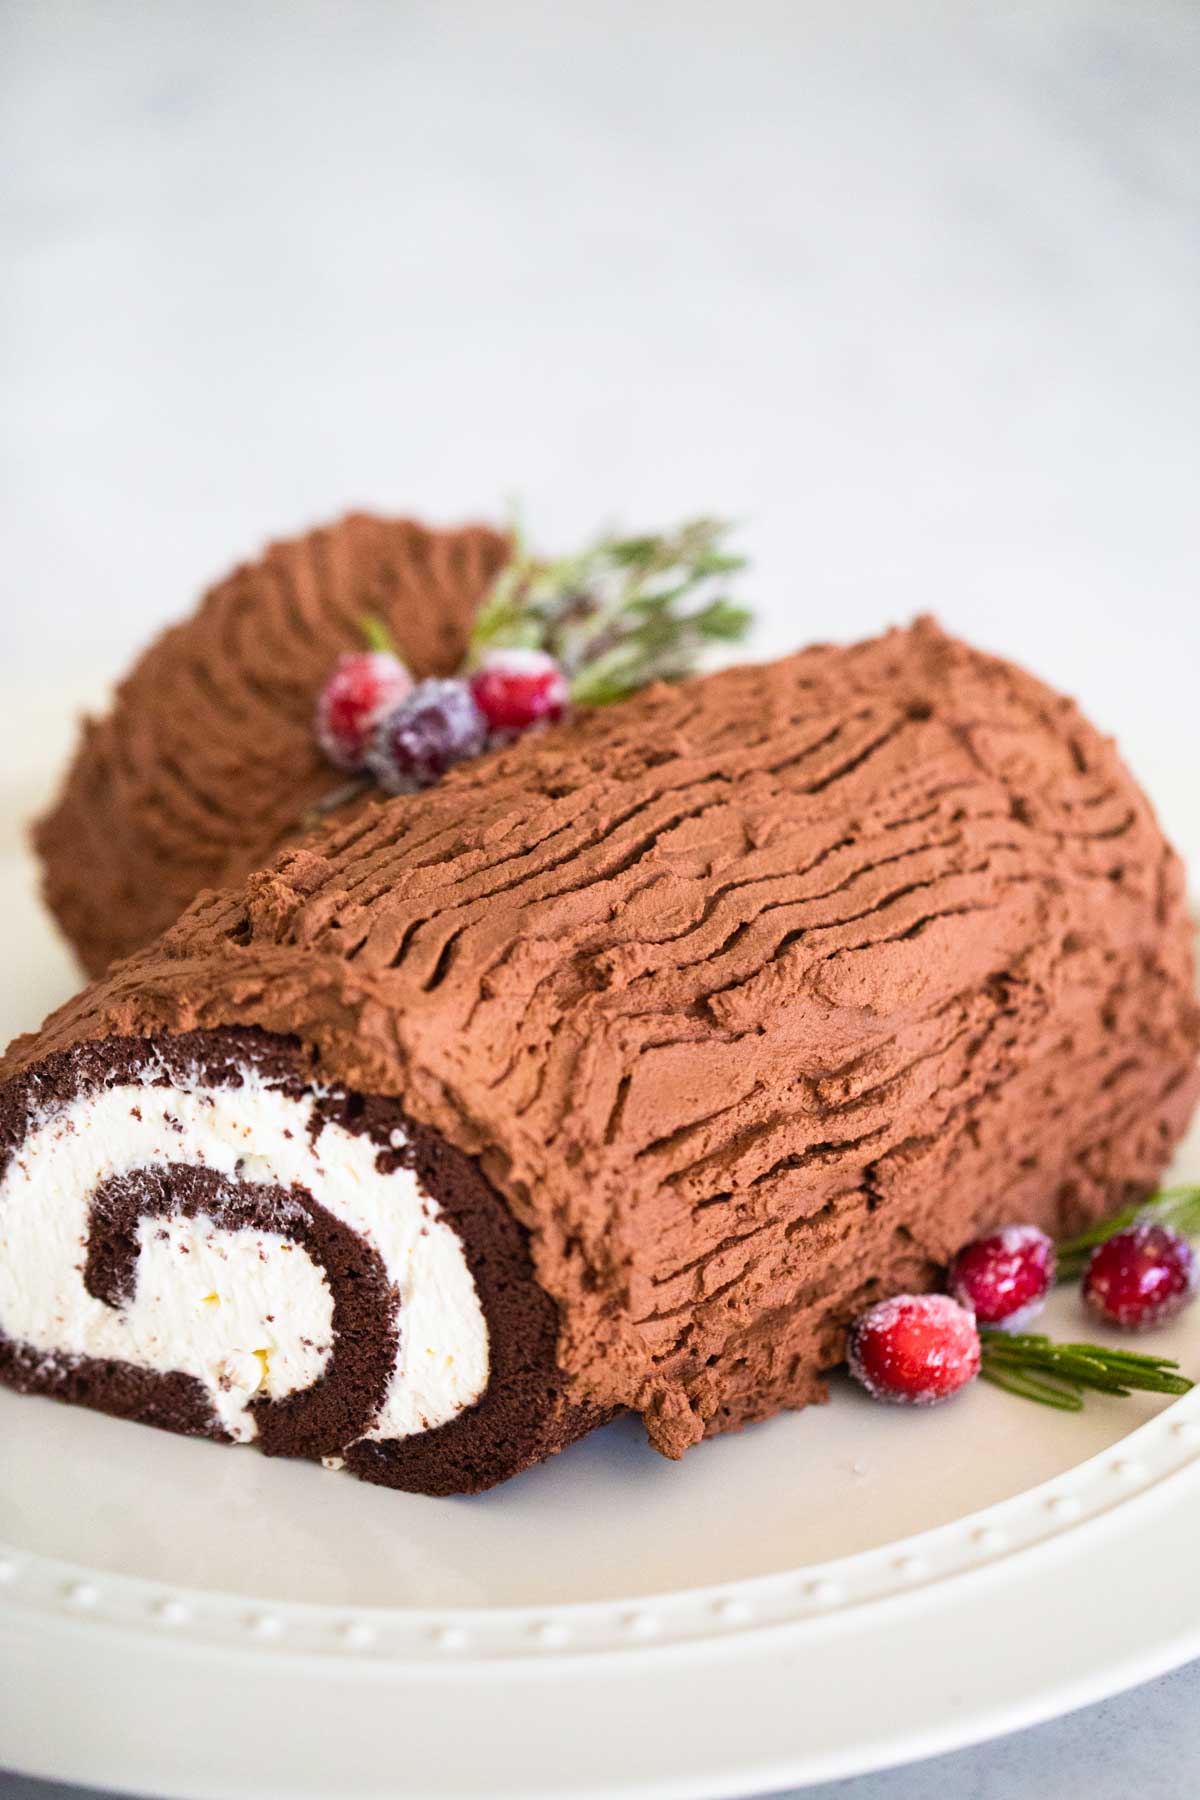 The finished yule log cake sits on a cake plate with sugared cranberries and rosemary.